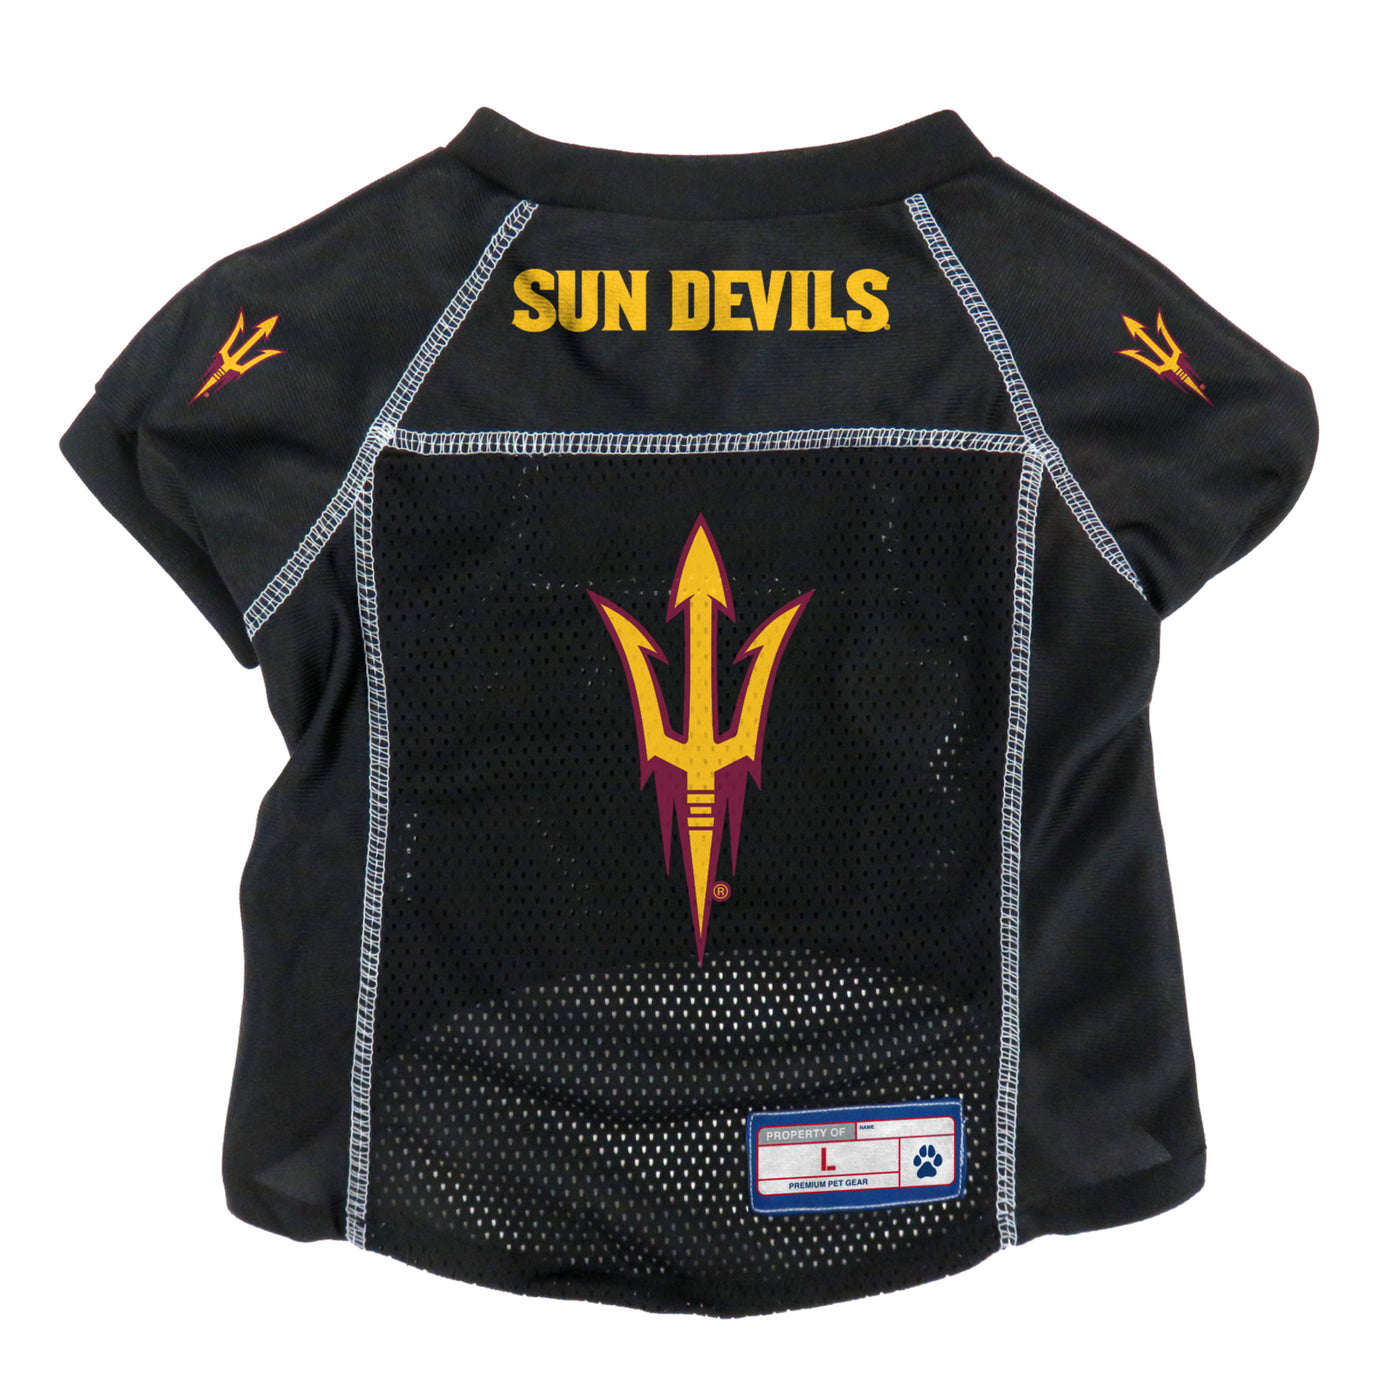 ASU mesh black pet football jersey. A gold fork oulined in maroon on each shoulder. One large gold fork outlined in maroon on the back and the text 